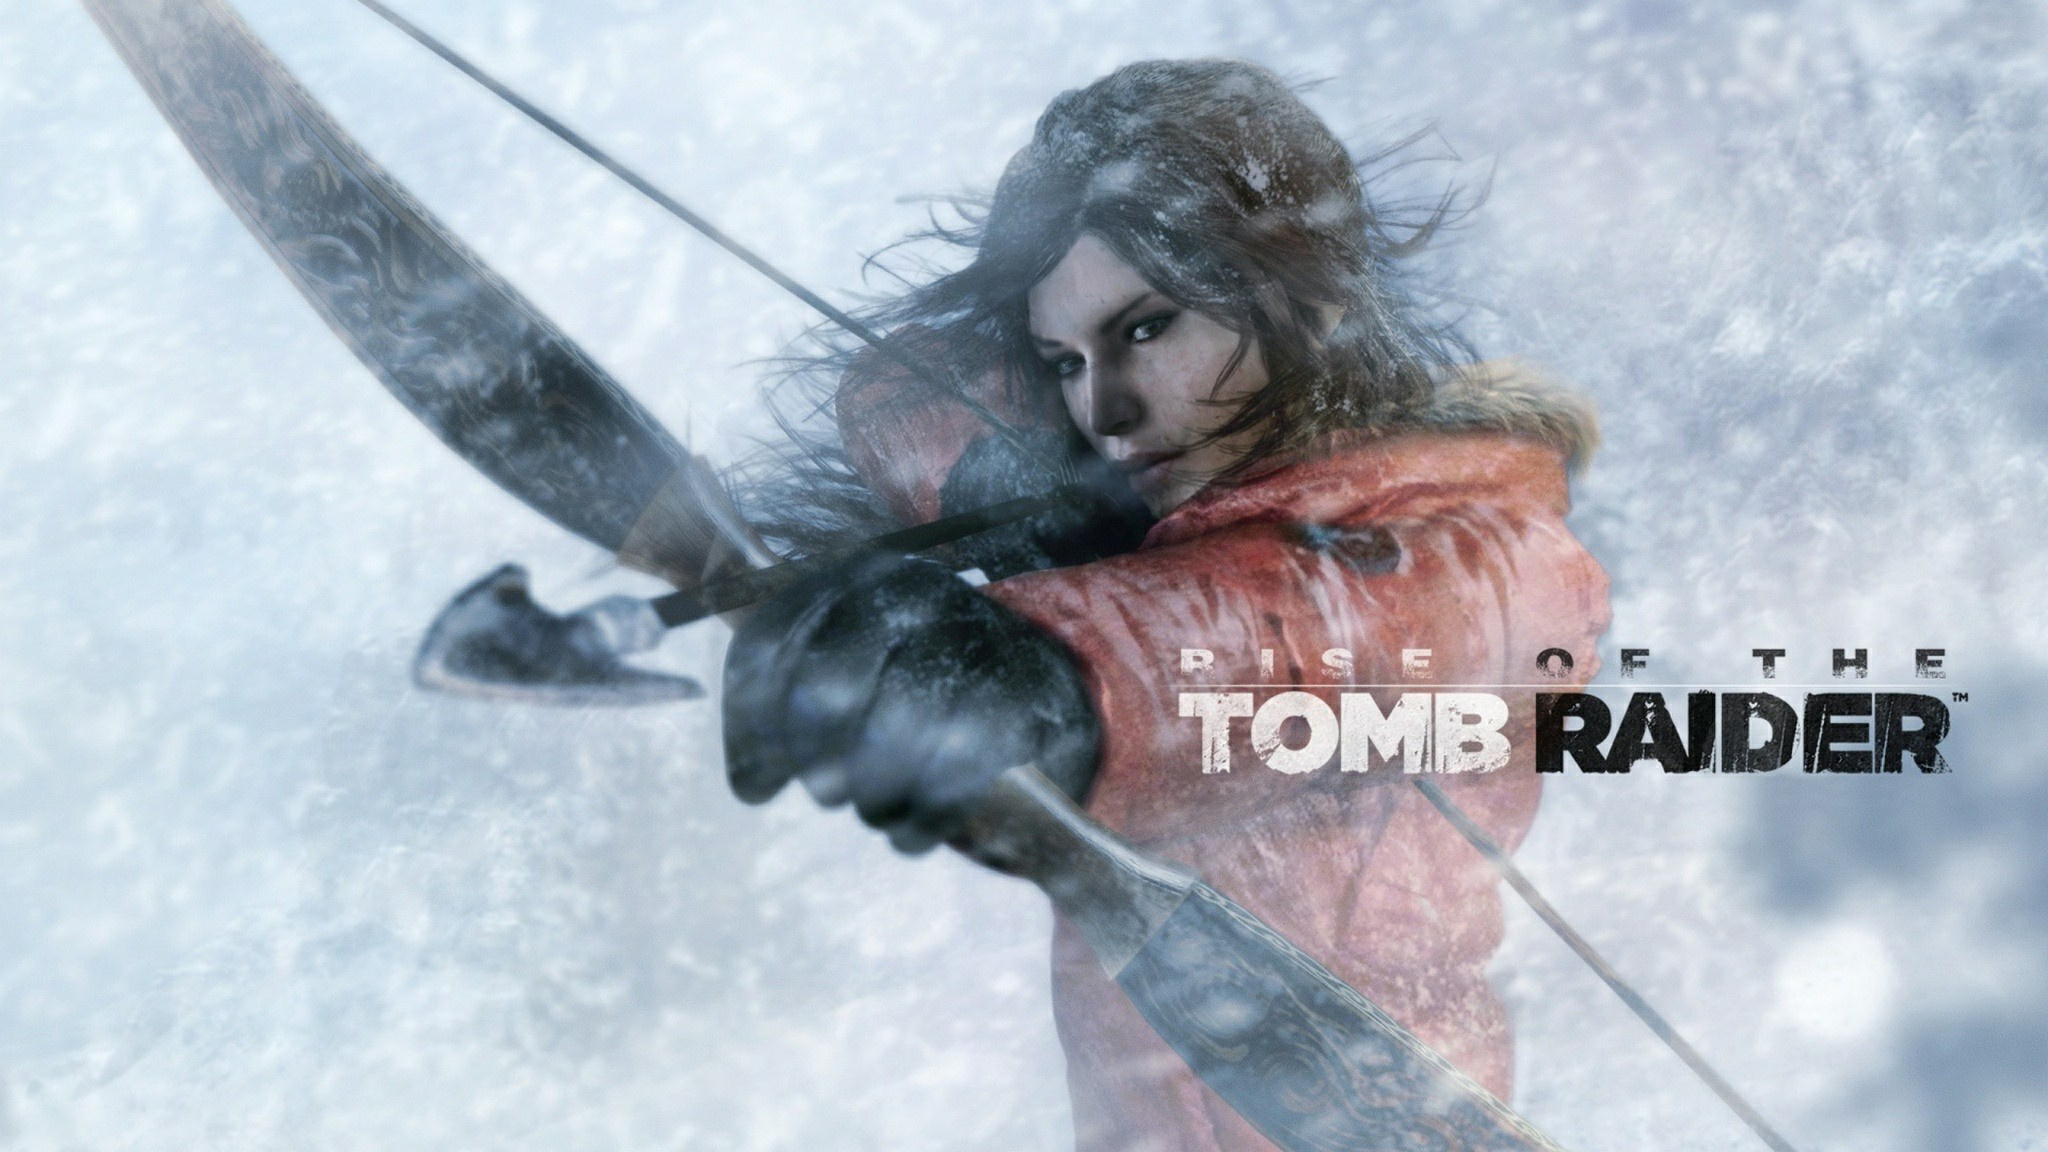 Rise of the Tomb Raider - Extended Demo Gameplay @ GamesCom 2015 @ 1080p HD  ✓ 